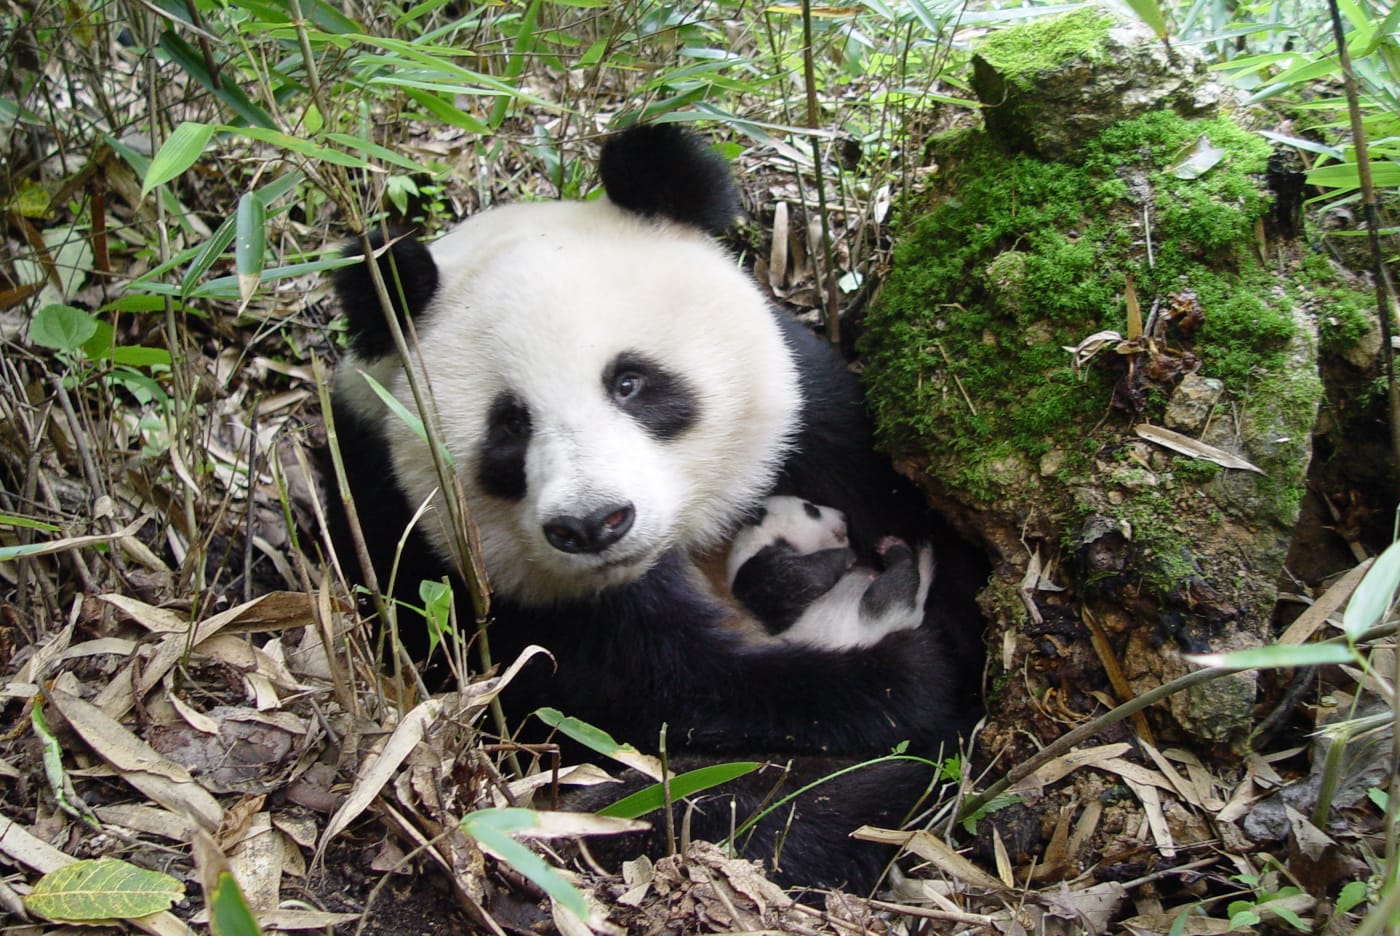 Giant Panda (Ailuropoda melanoleuca) with a young cub in Shaanxi province, China.